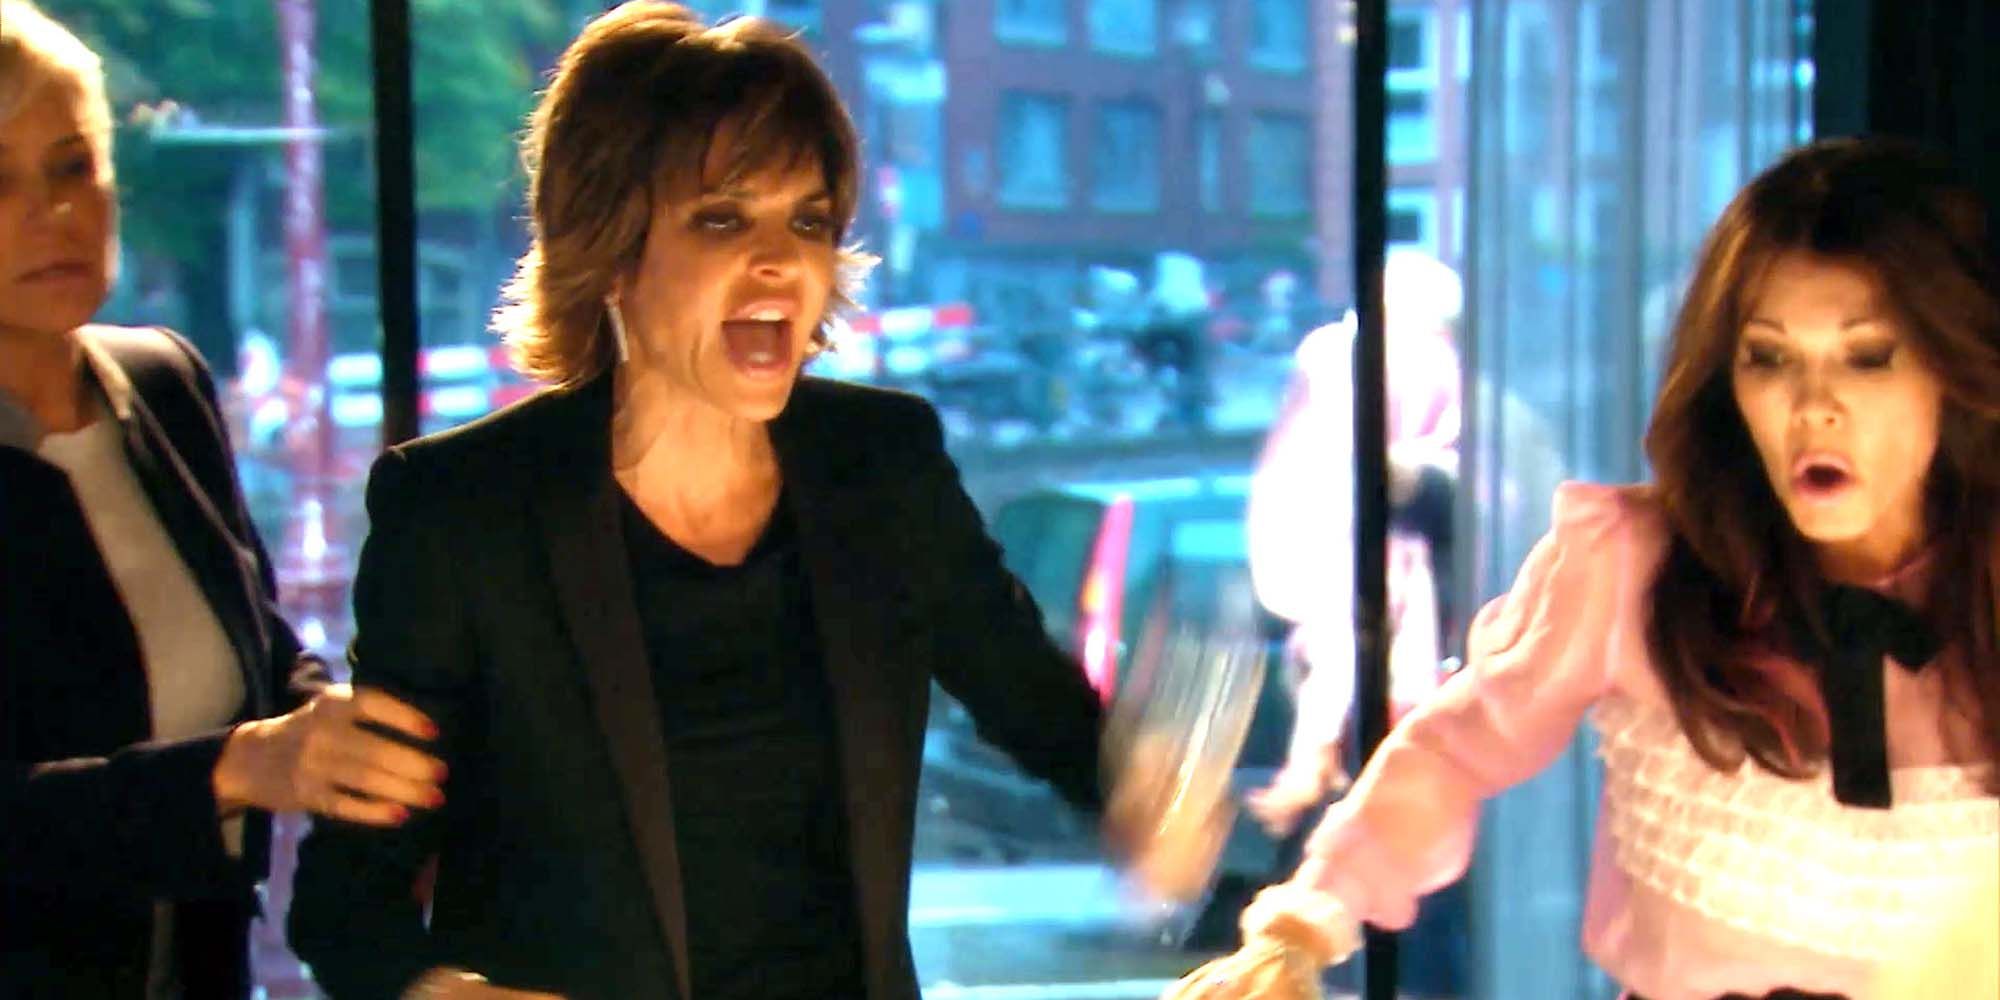 Lisa Rinna slamming a wine glass on the table as LVP jumps up on RHOBH